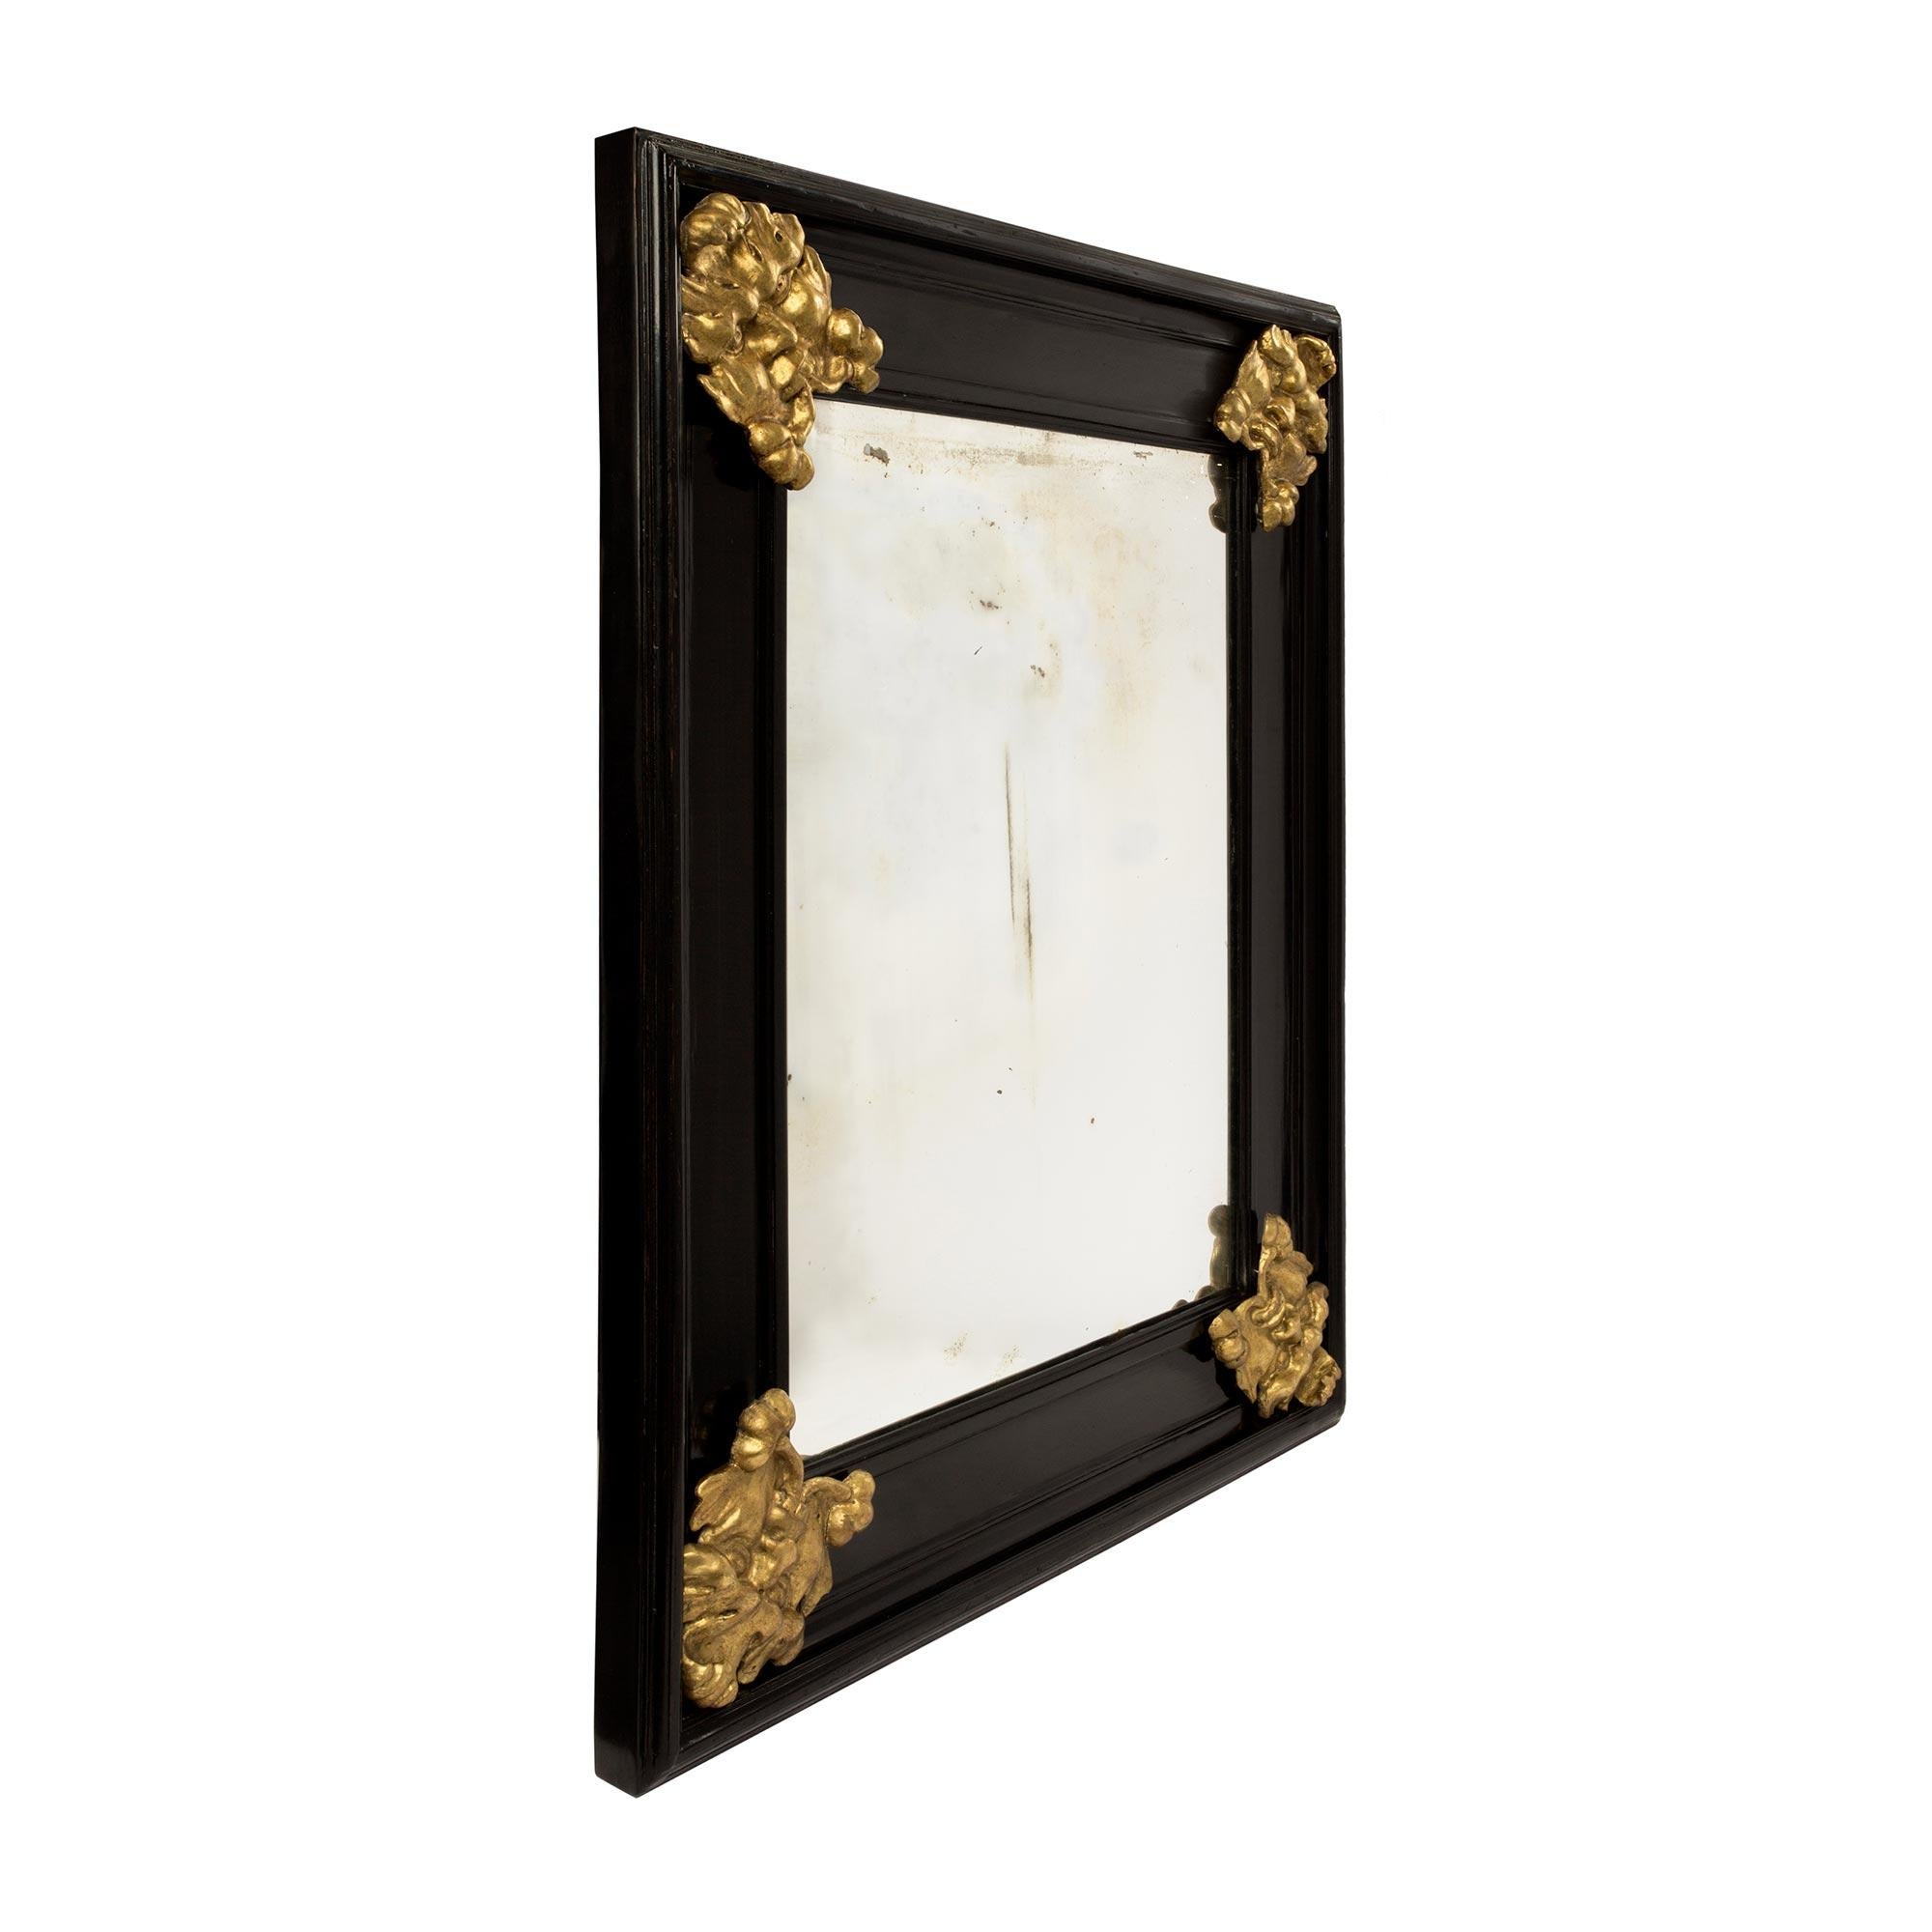 A handsome Italian 19th century Florentine ebony and giltwood mirror. The original mirror plate is framed within a thick mottled ebony frame with richly carved giltwood satyrs at each corner.

  